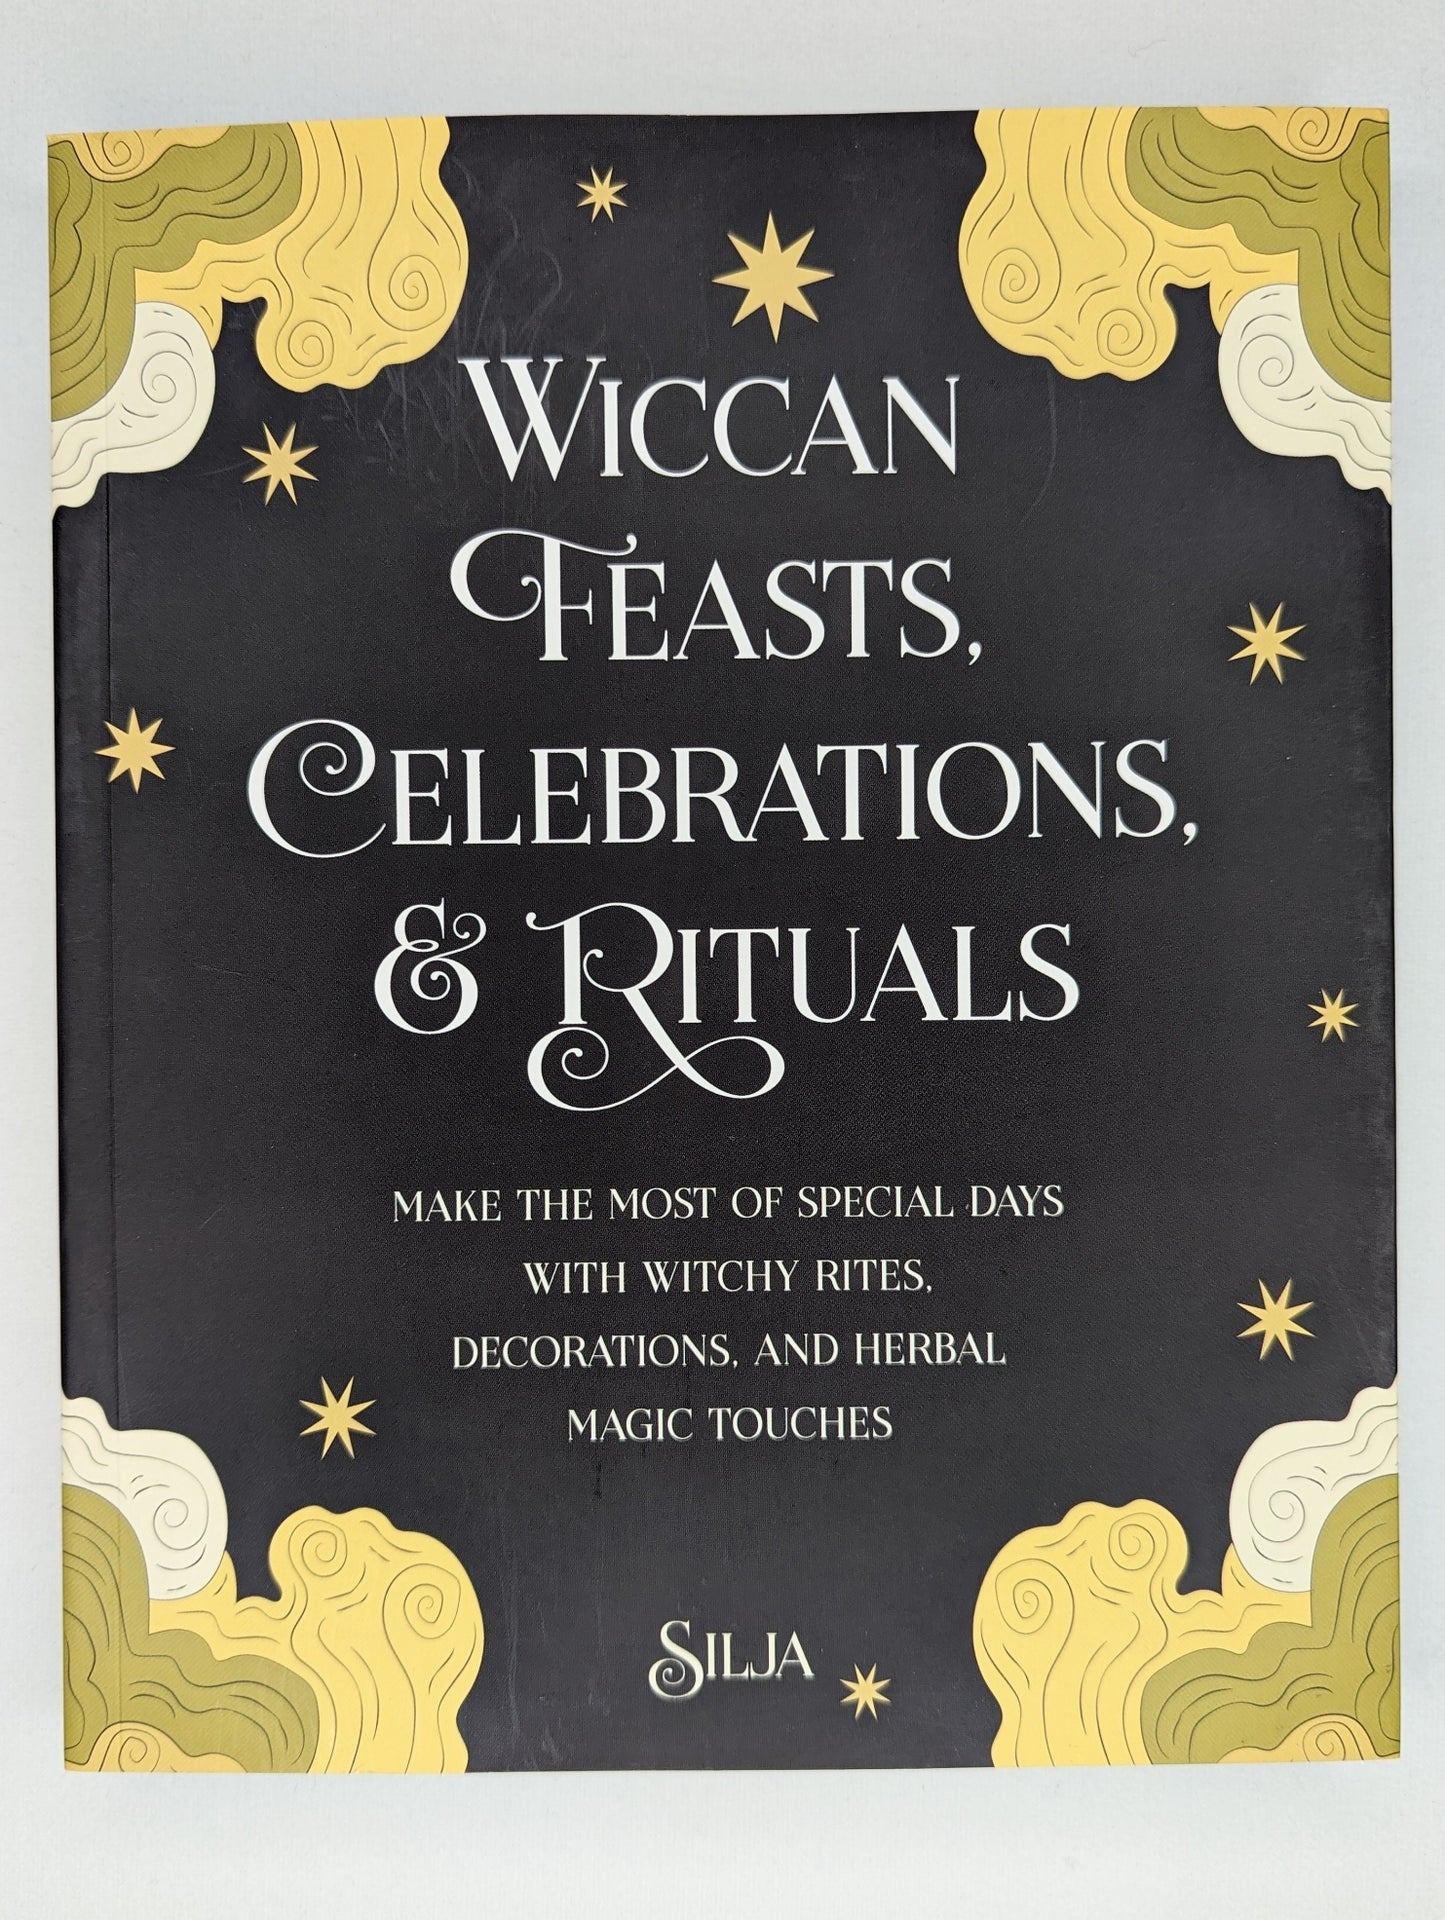 Wiccan Feasts, Celebrations, & Rituals: Make the Most of Special Days with Witchy Rites, Decorations, and Herbal Magic Touches